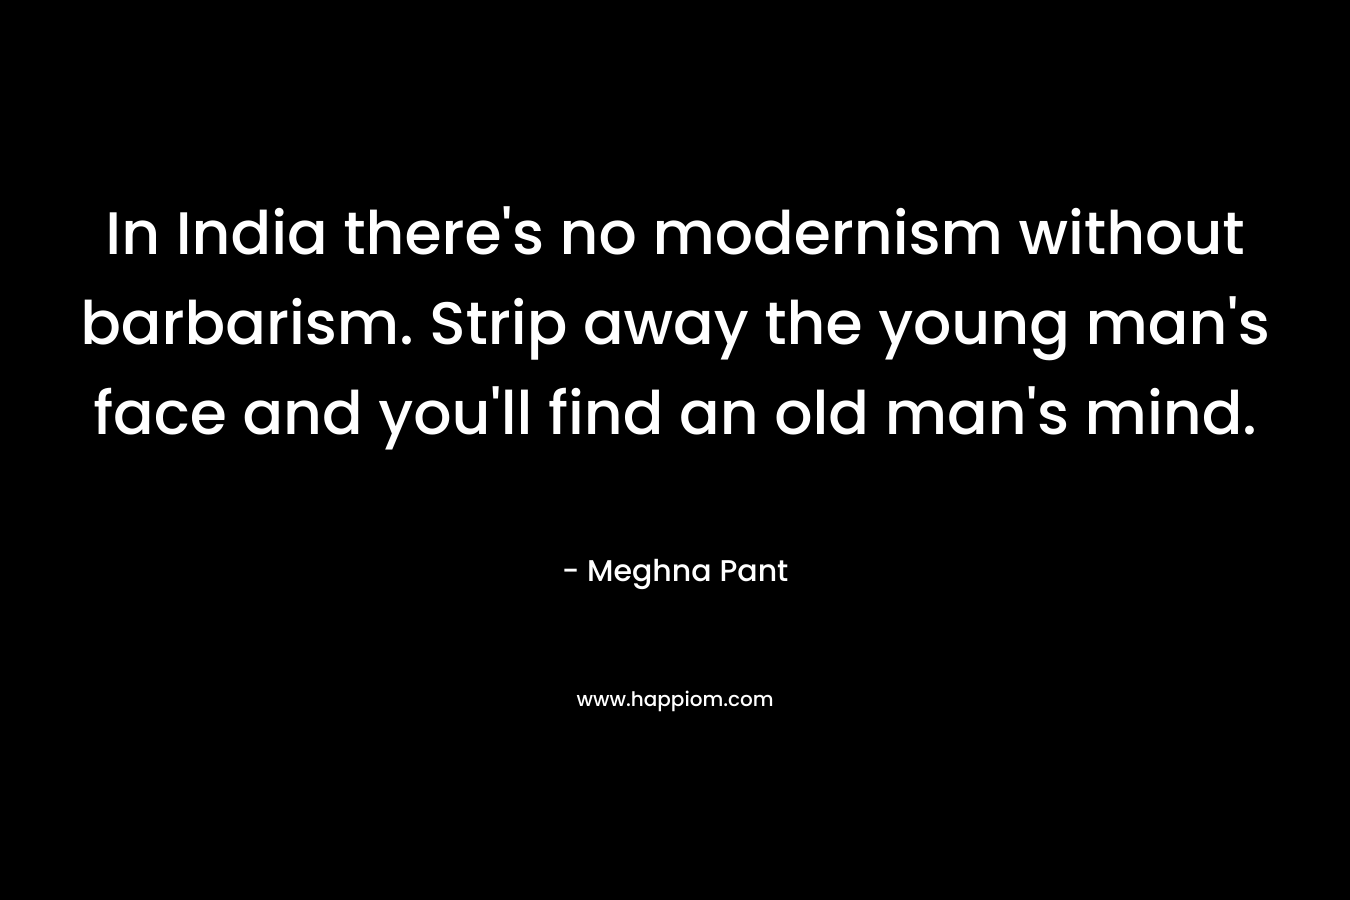 In India there’s no modernism without barbarism. Strip away the young man’s face and you’ll find an old man’s mind. – Meghna Pant